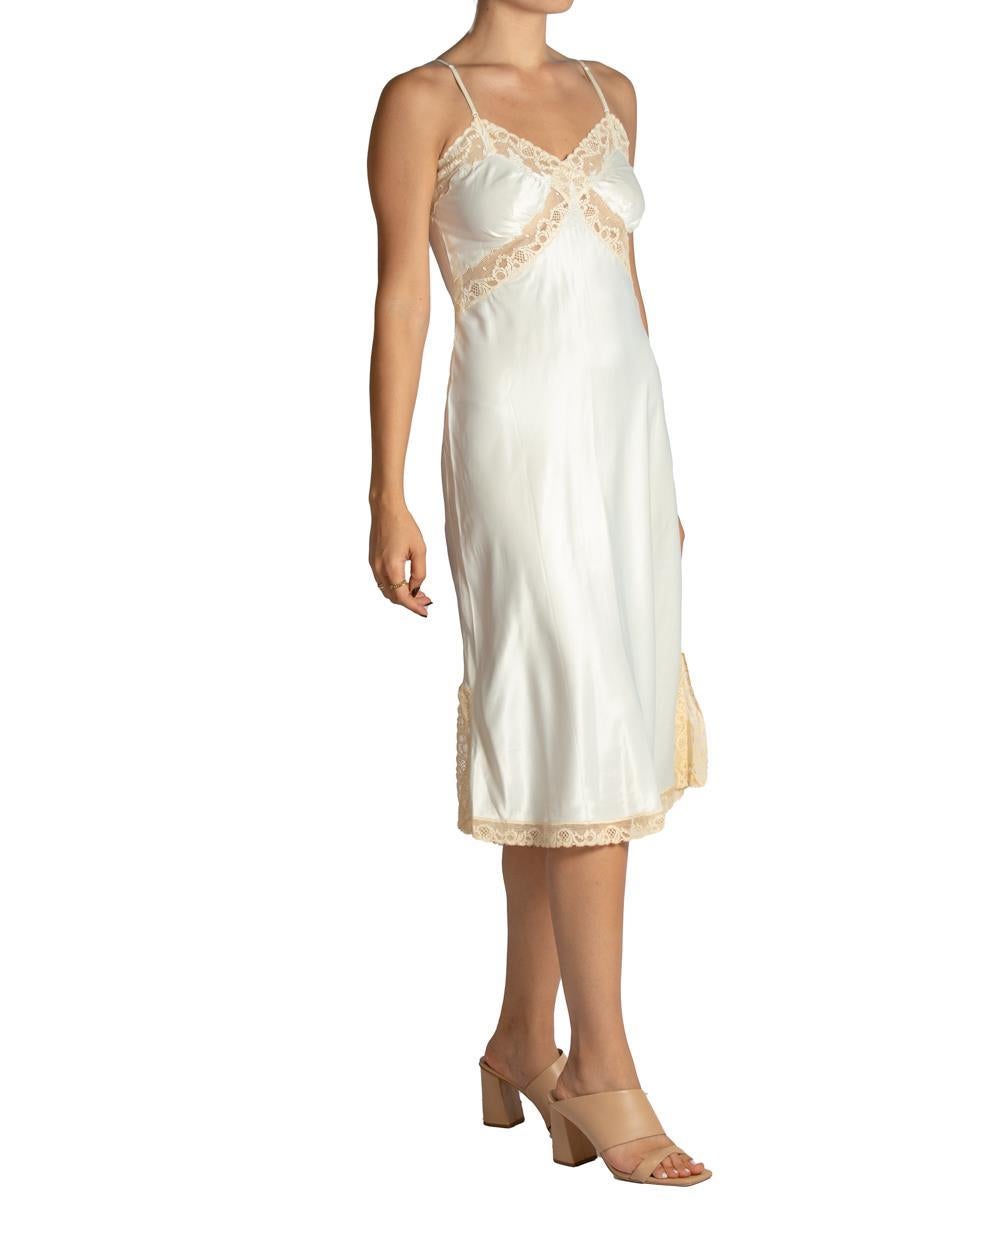 Women's 1950S Cream Bias Cut Nylon Negligee With Lace Trim & Hand Embroidered Flowers For Sale